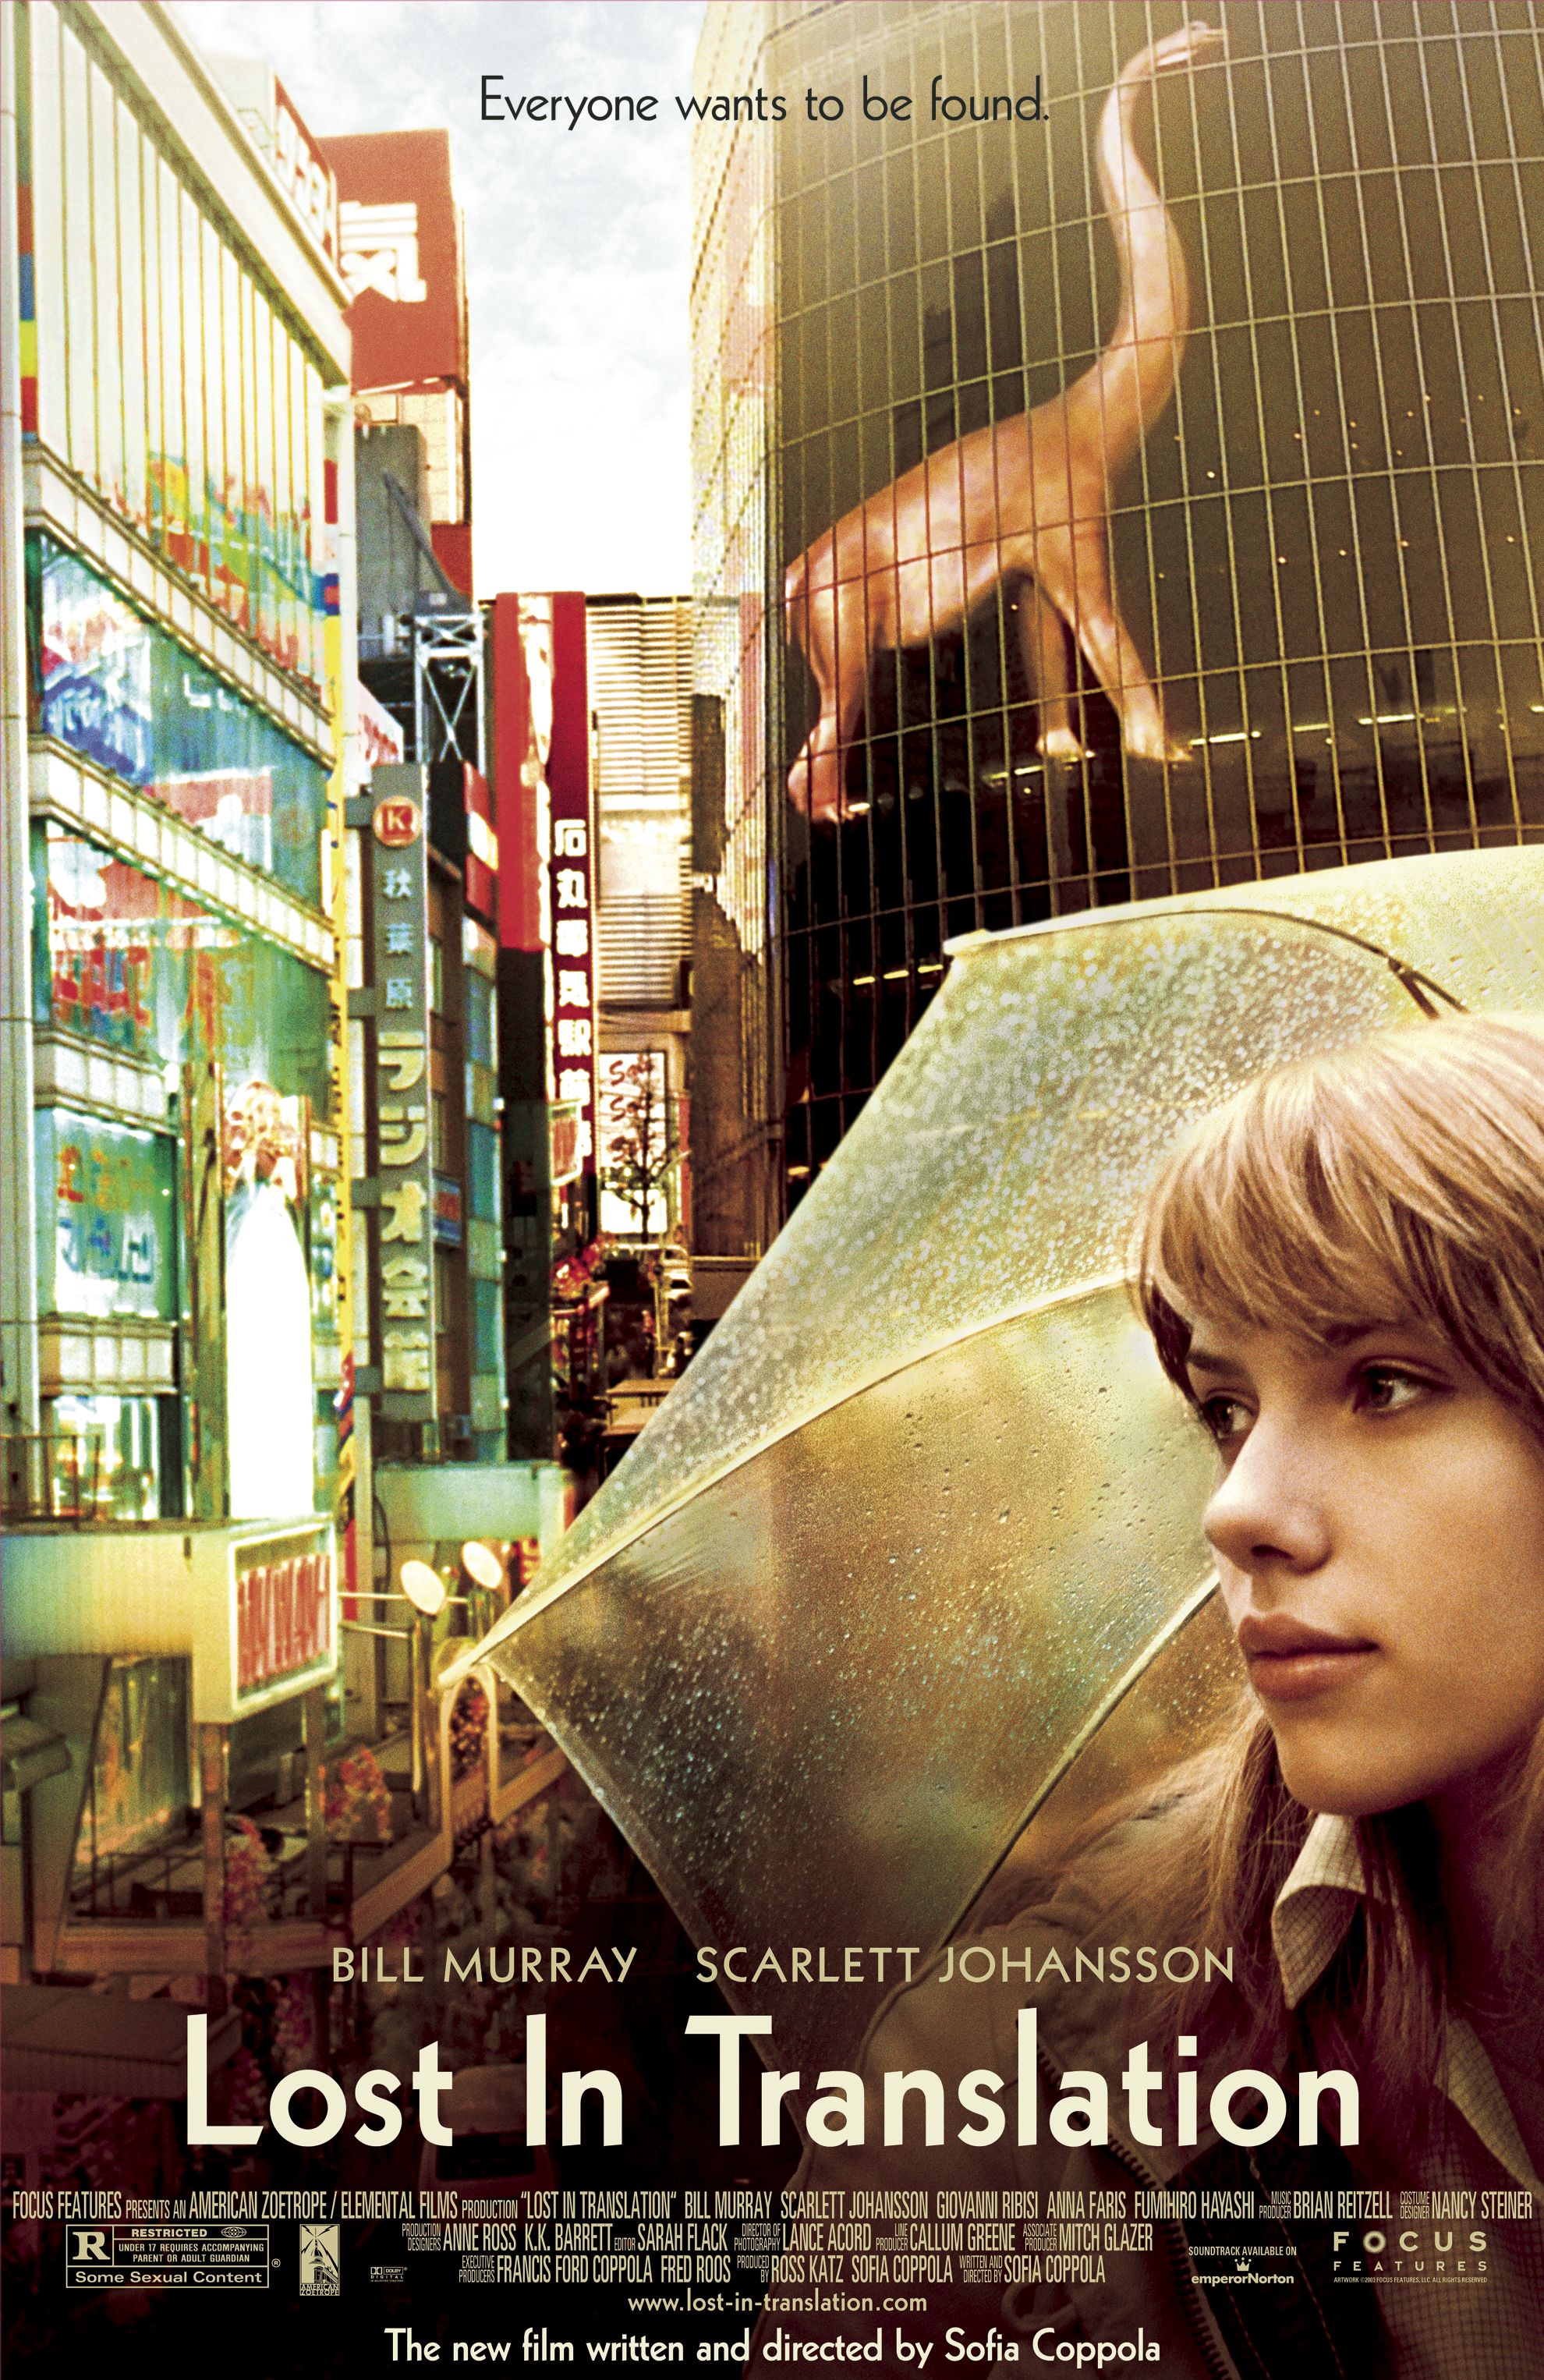 Lost in Translation (2003) by Sofia Coppola